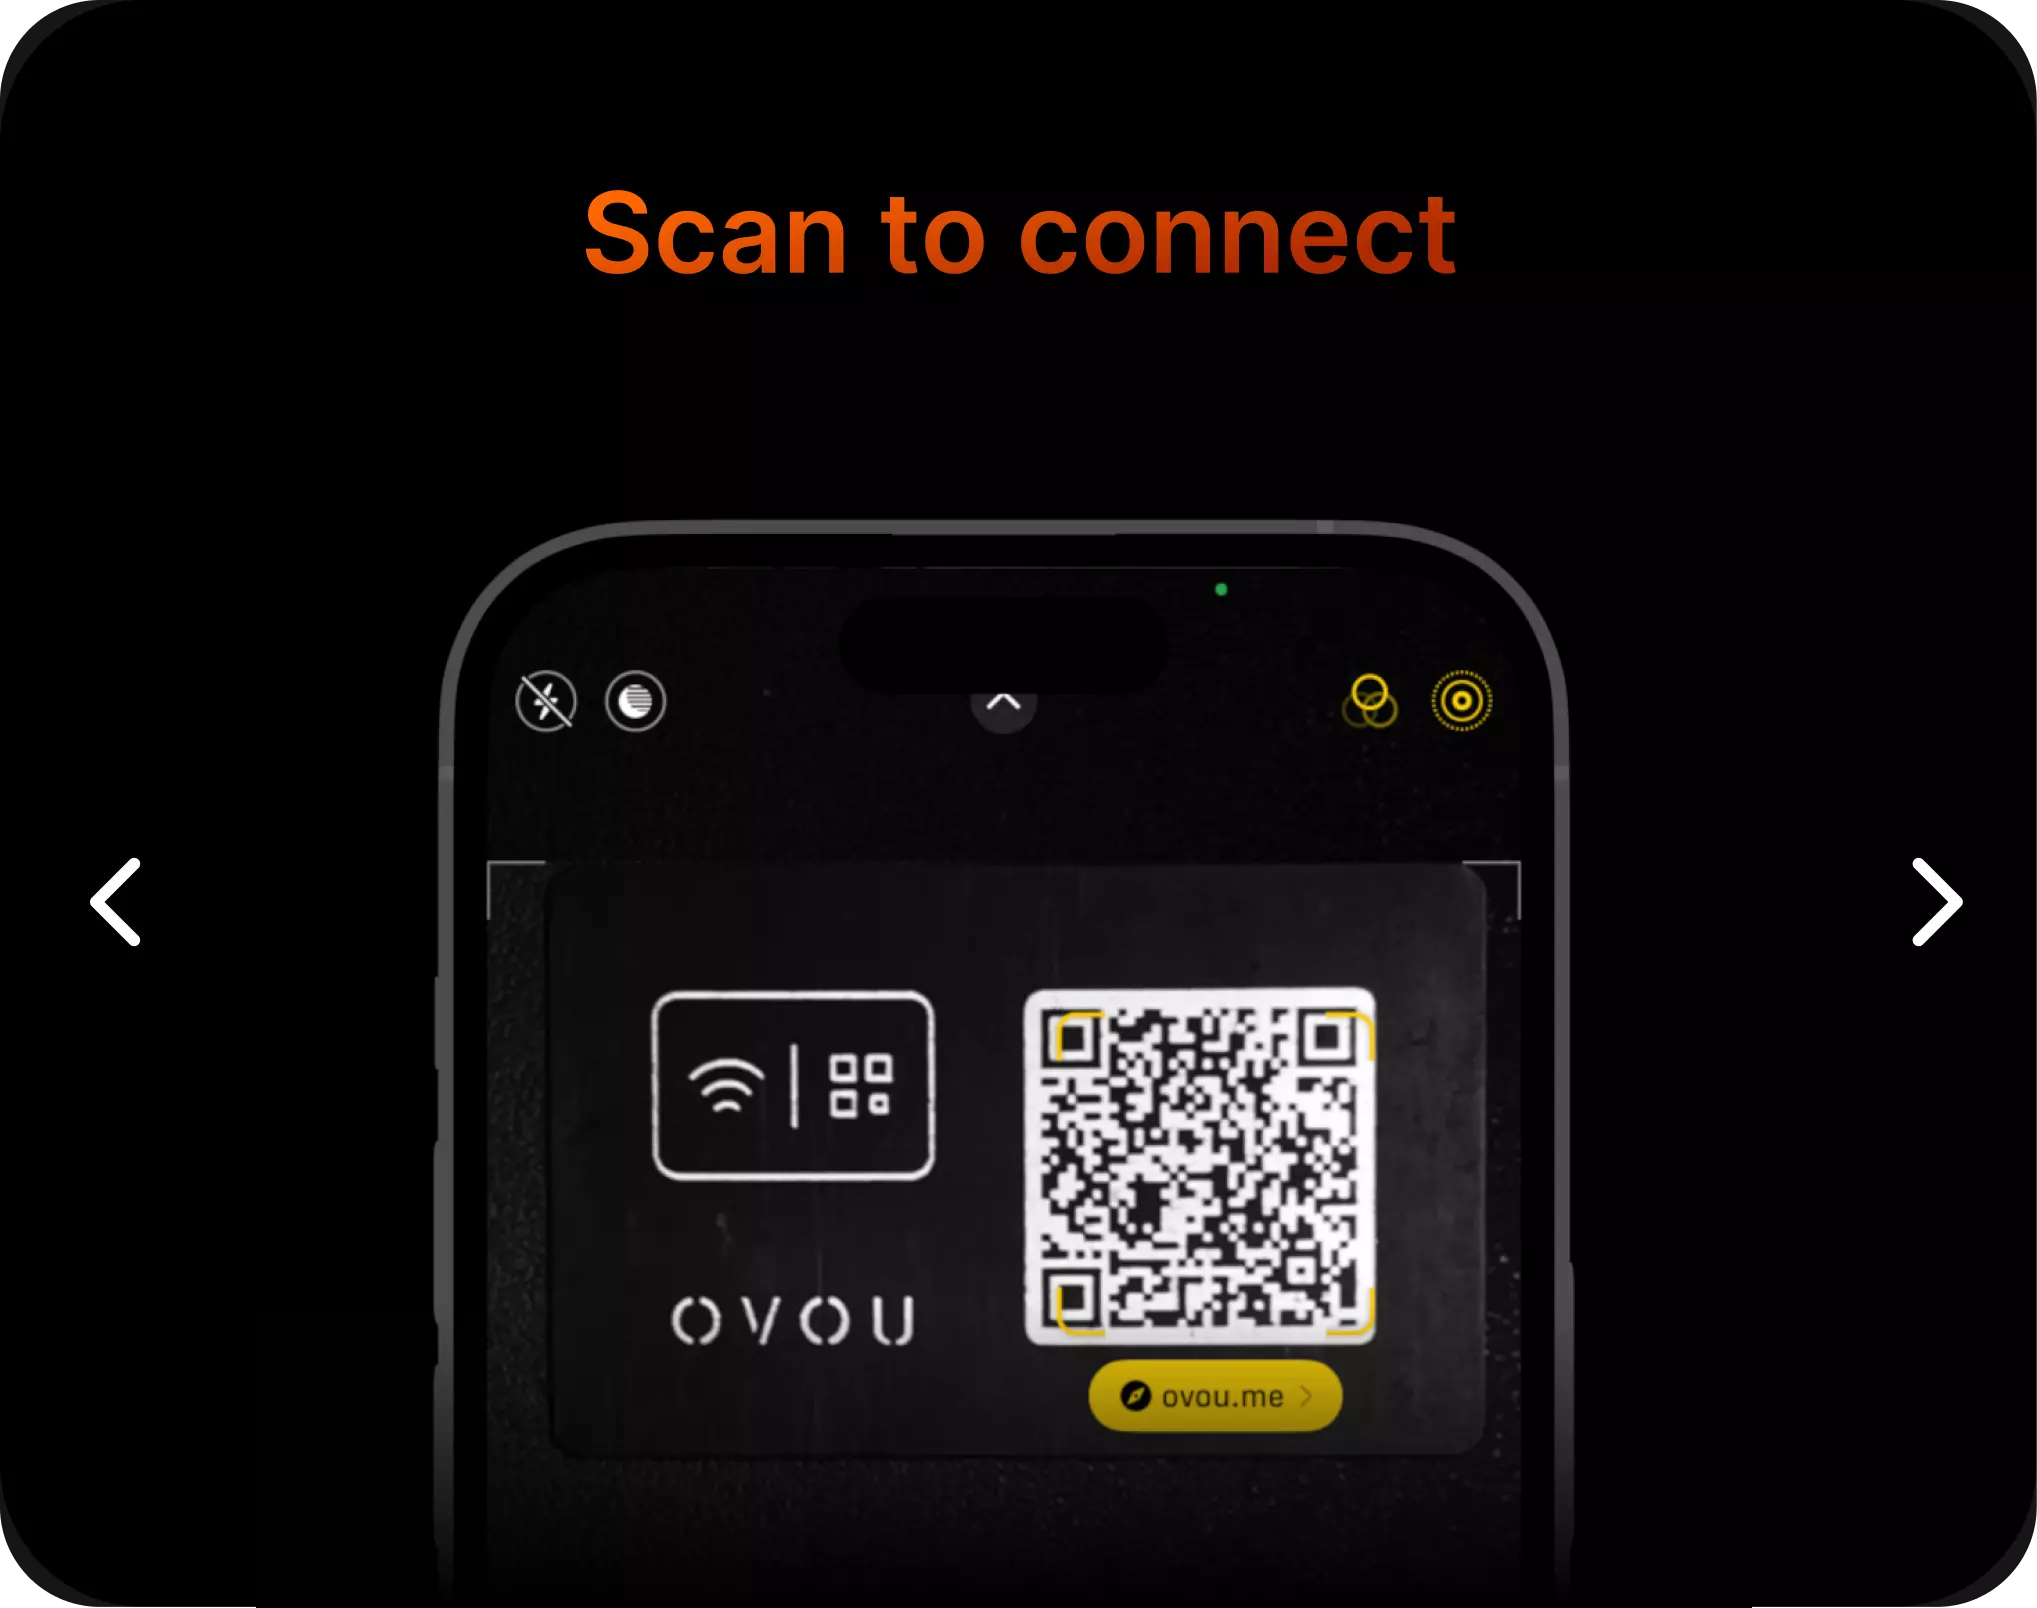 Phone on camera, scanning QR code from the back of OVOU Card